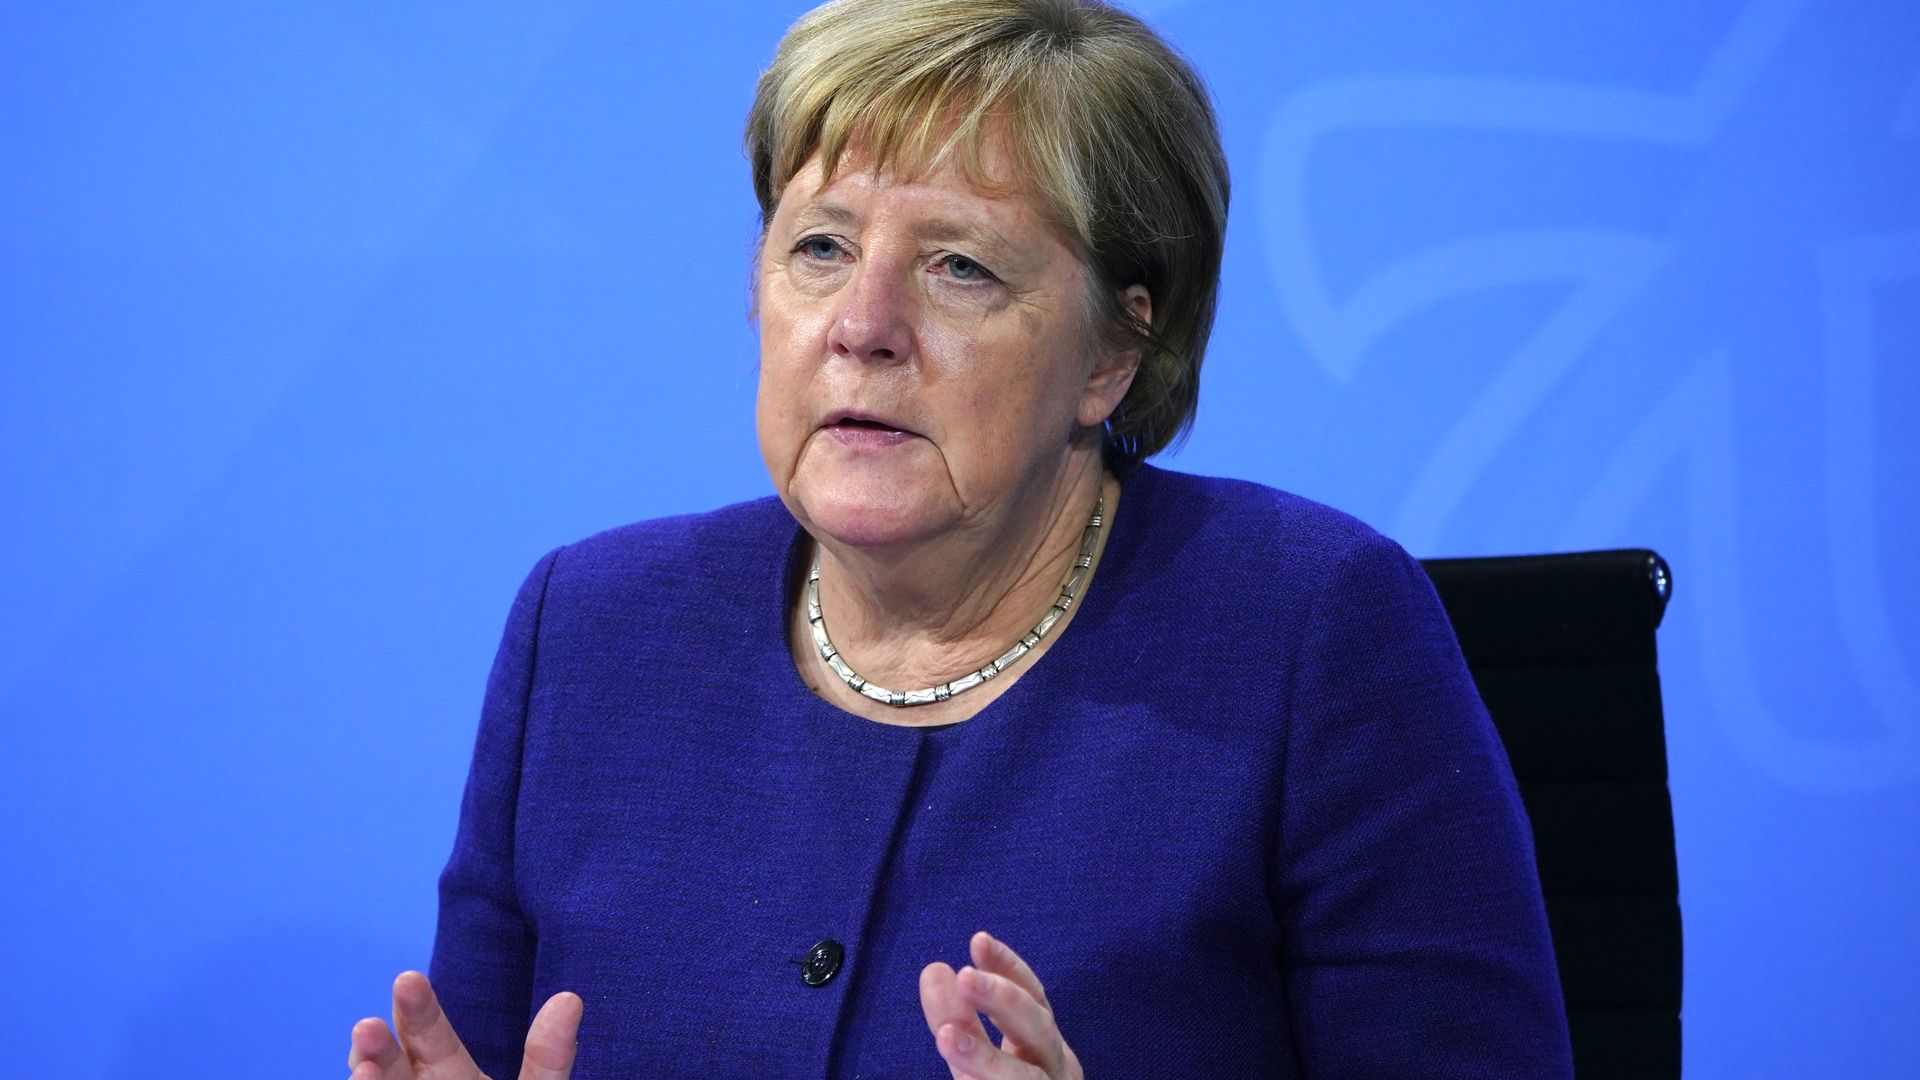 Chancellor Angela Merkel after a meeting between German State Premiers and acting Chancellor on the occasion of the current coronavirus situation, at the Chancellery on Nov. 18, 2021.